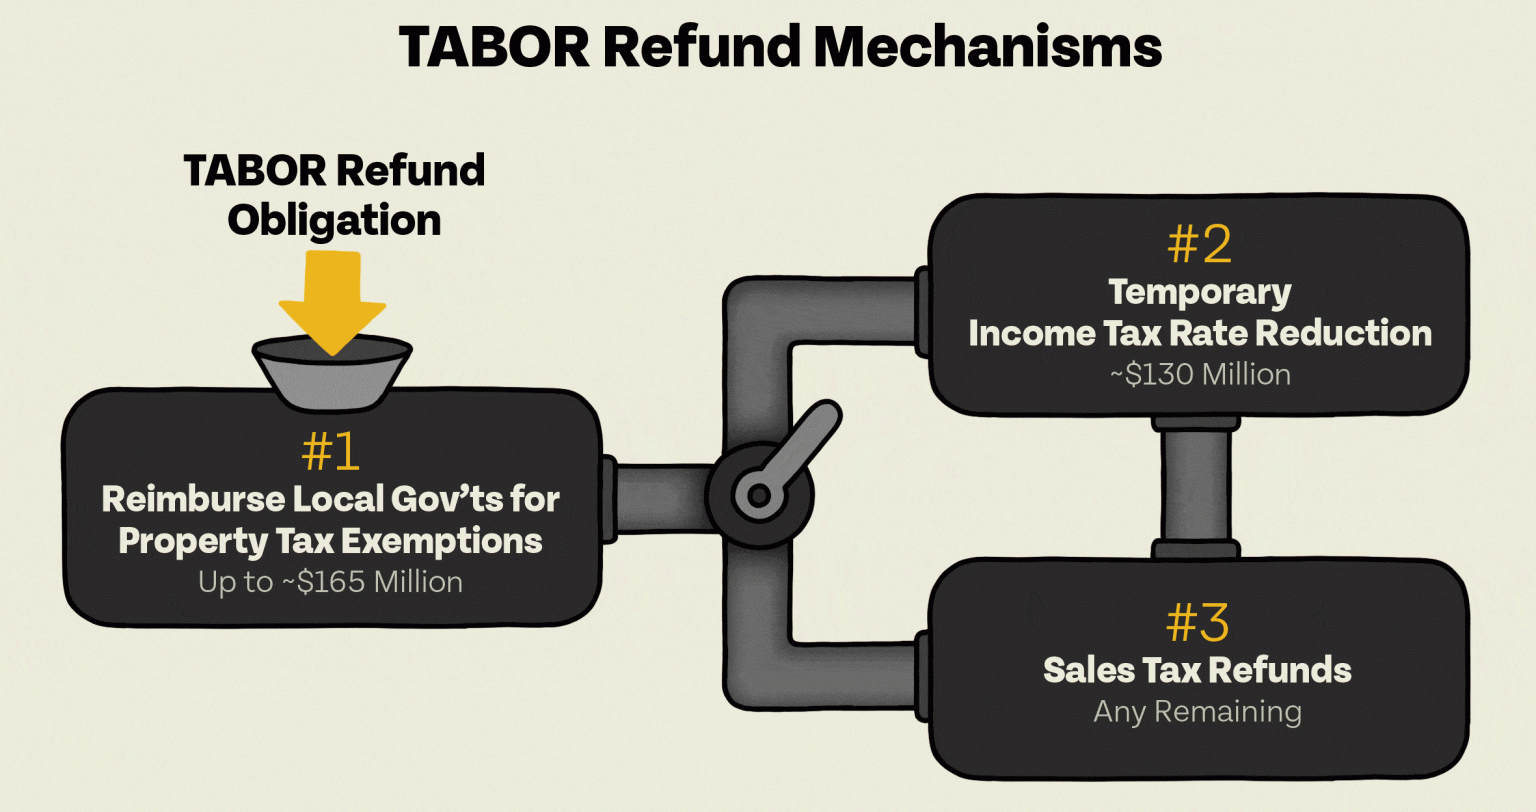 colorado-tabor-refund-2022-how-to-get-750-deposited-into-your-account